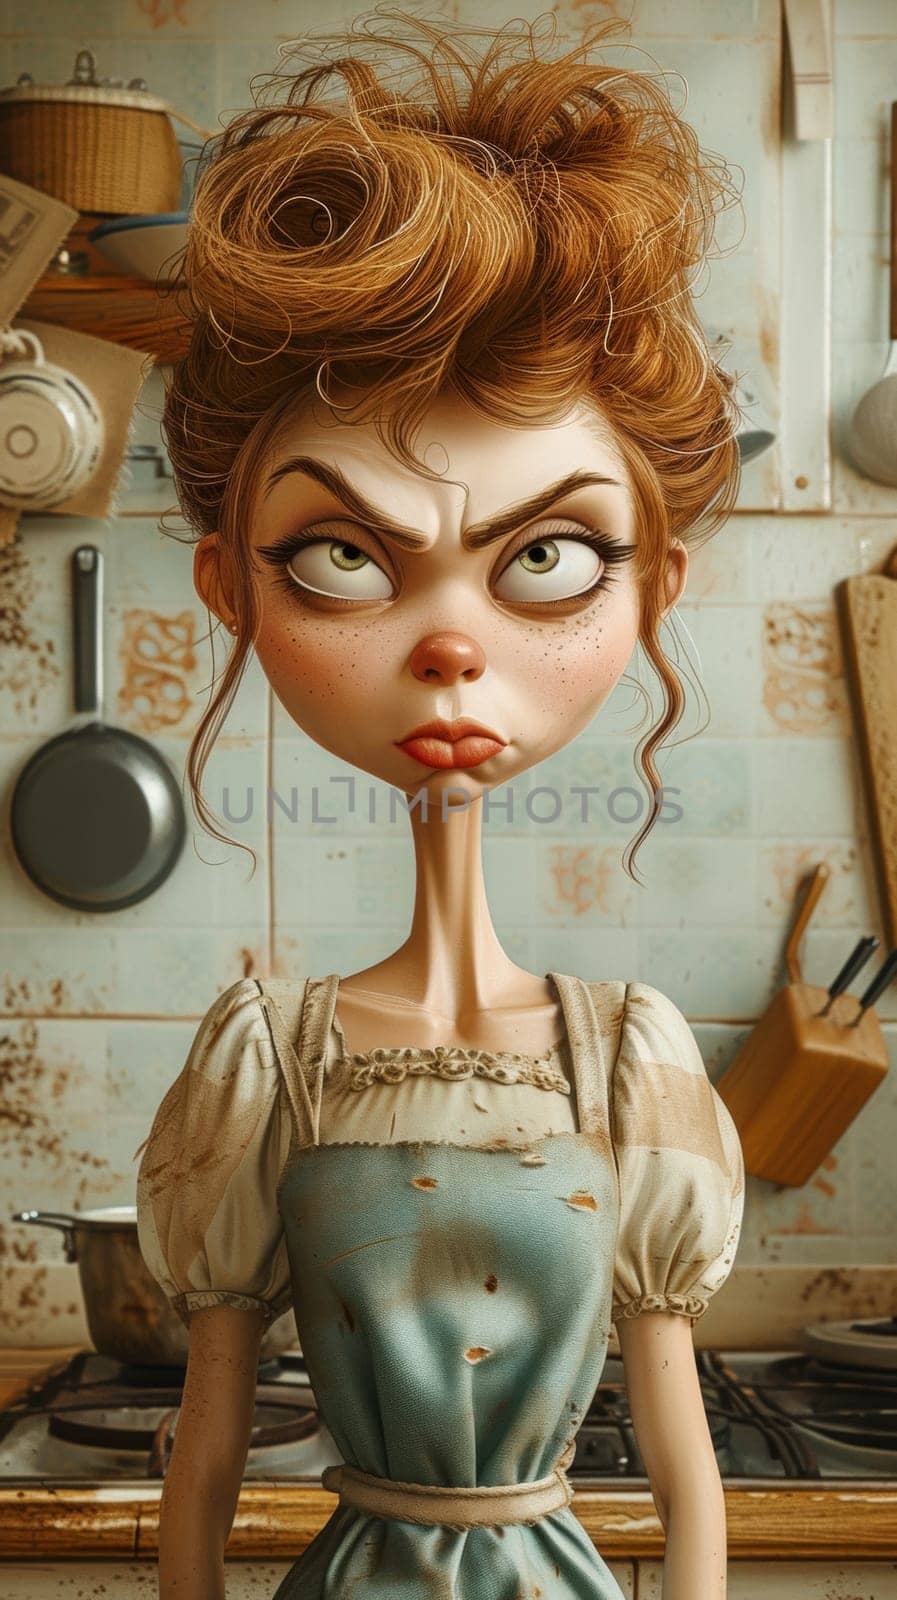 A cartoon character with a frowning face in an old kitchen